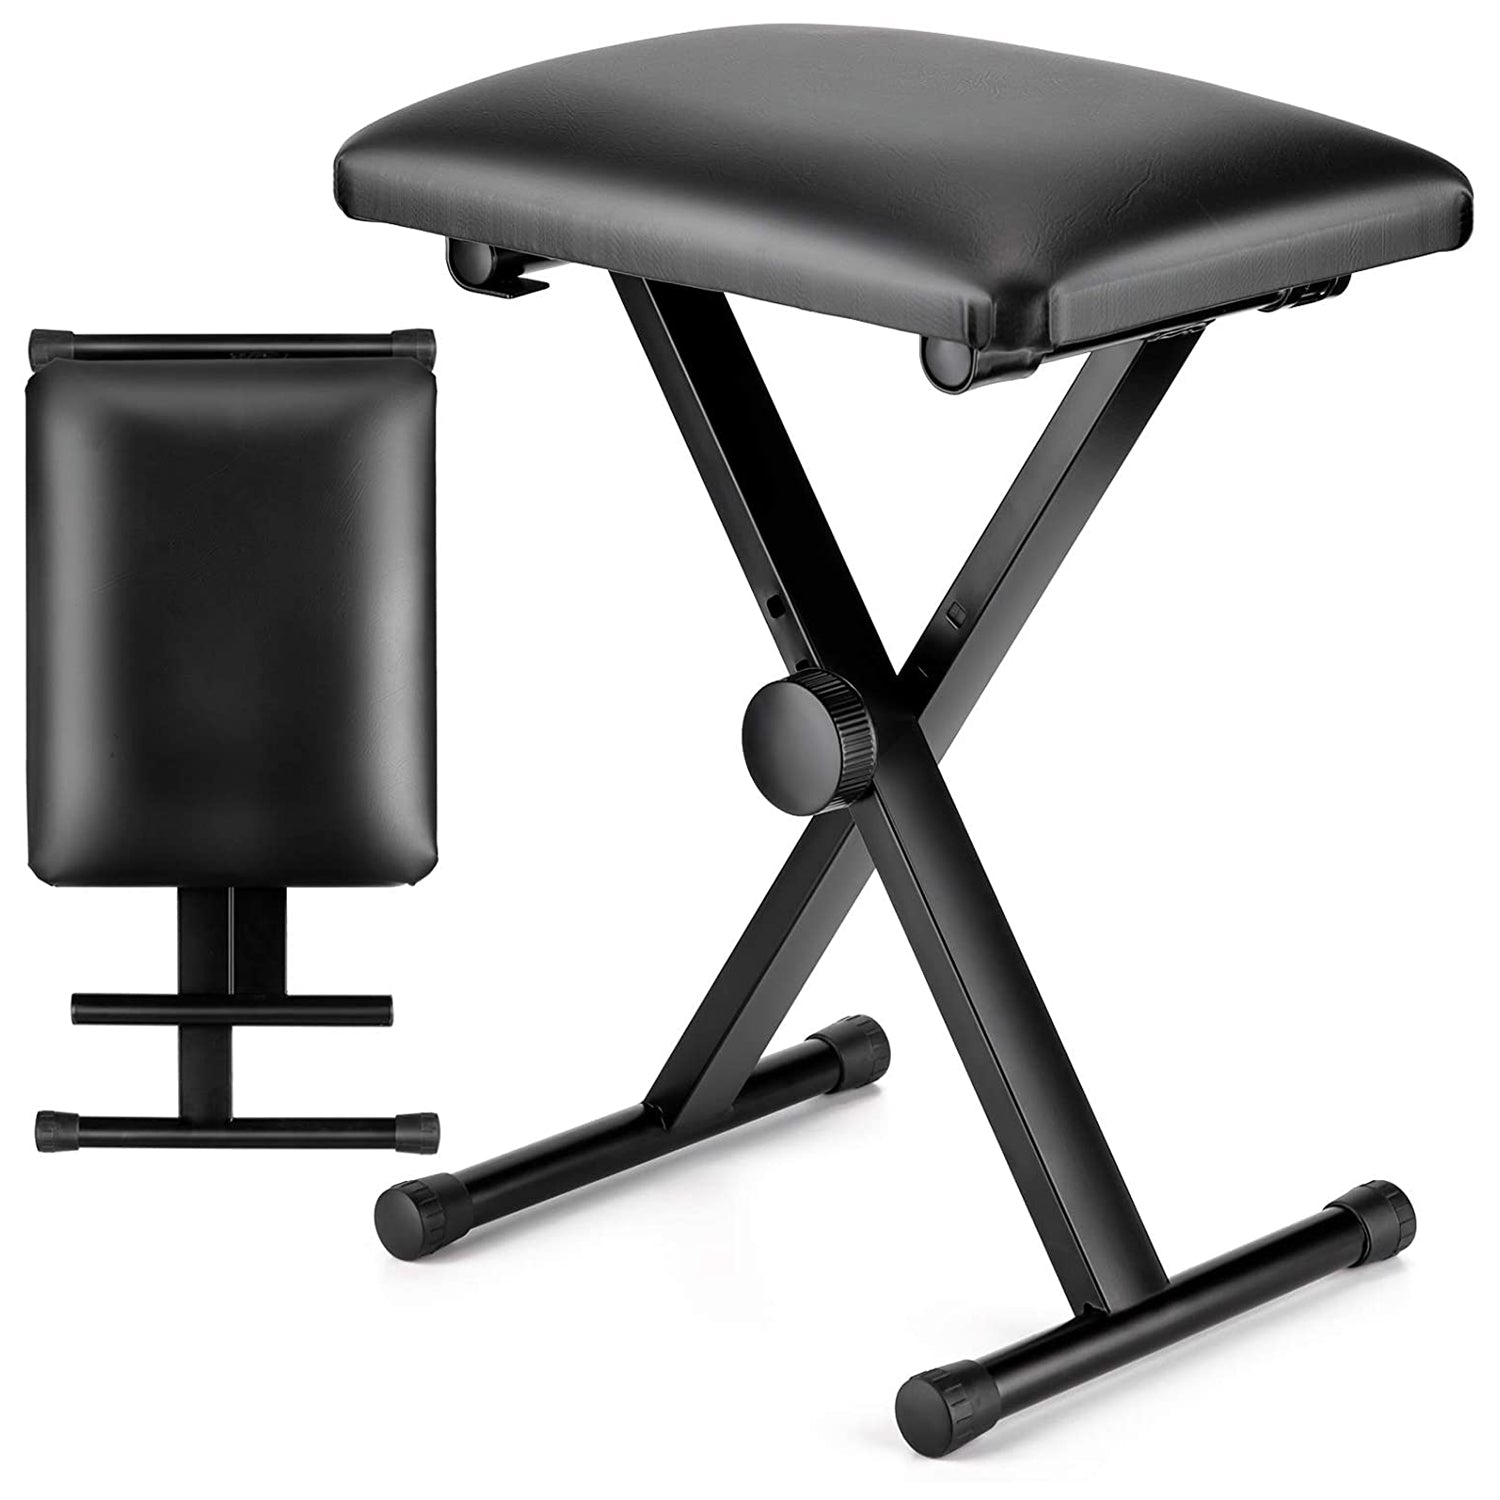 5 Core Adjustable Keyboard Bench 16.3 - 19.6 Inch X style Bench Piano Stool Chair Thick And Padded Comfortable Guitar Stools & Seats - KBB 02 BLK